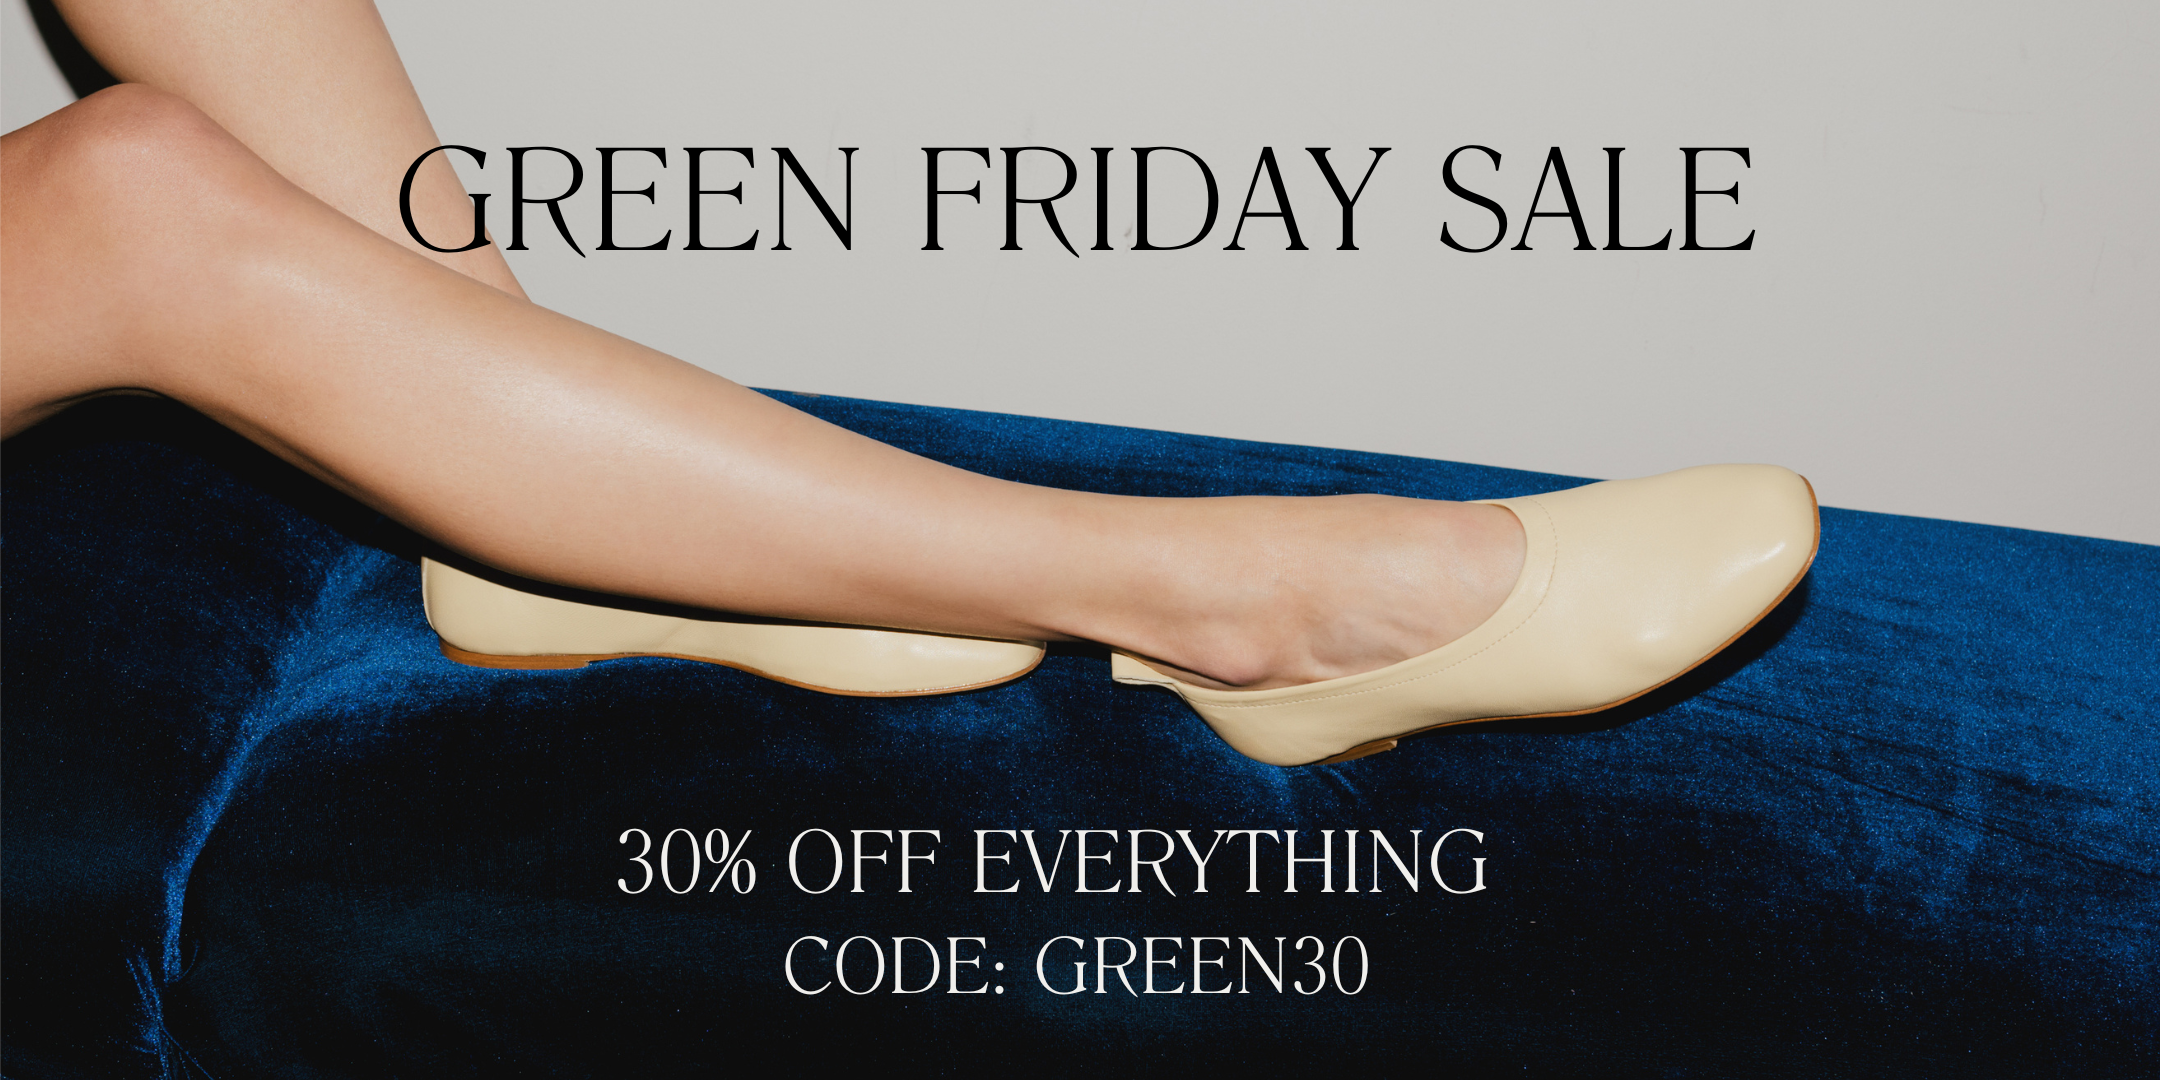 Black Friday Sale 30% OFF Eco-Friendly Sustainable Gifts